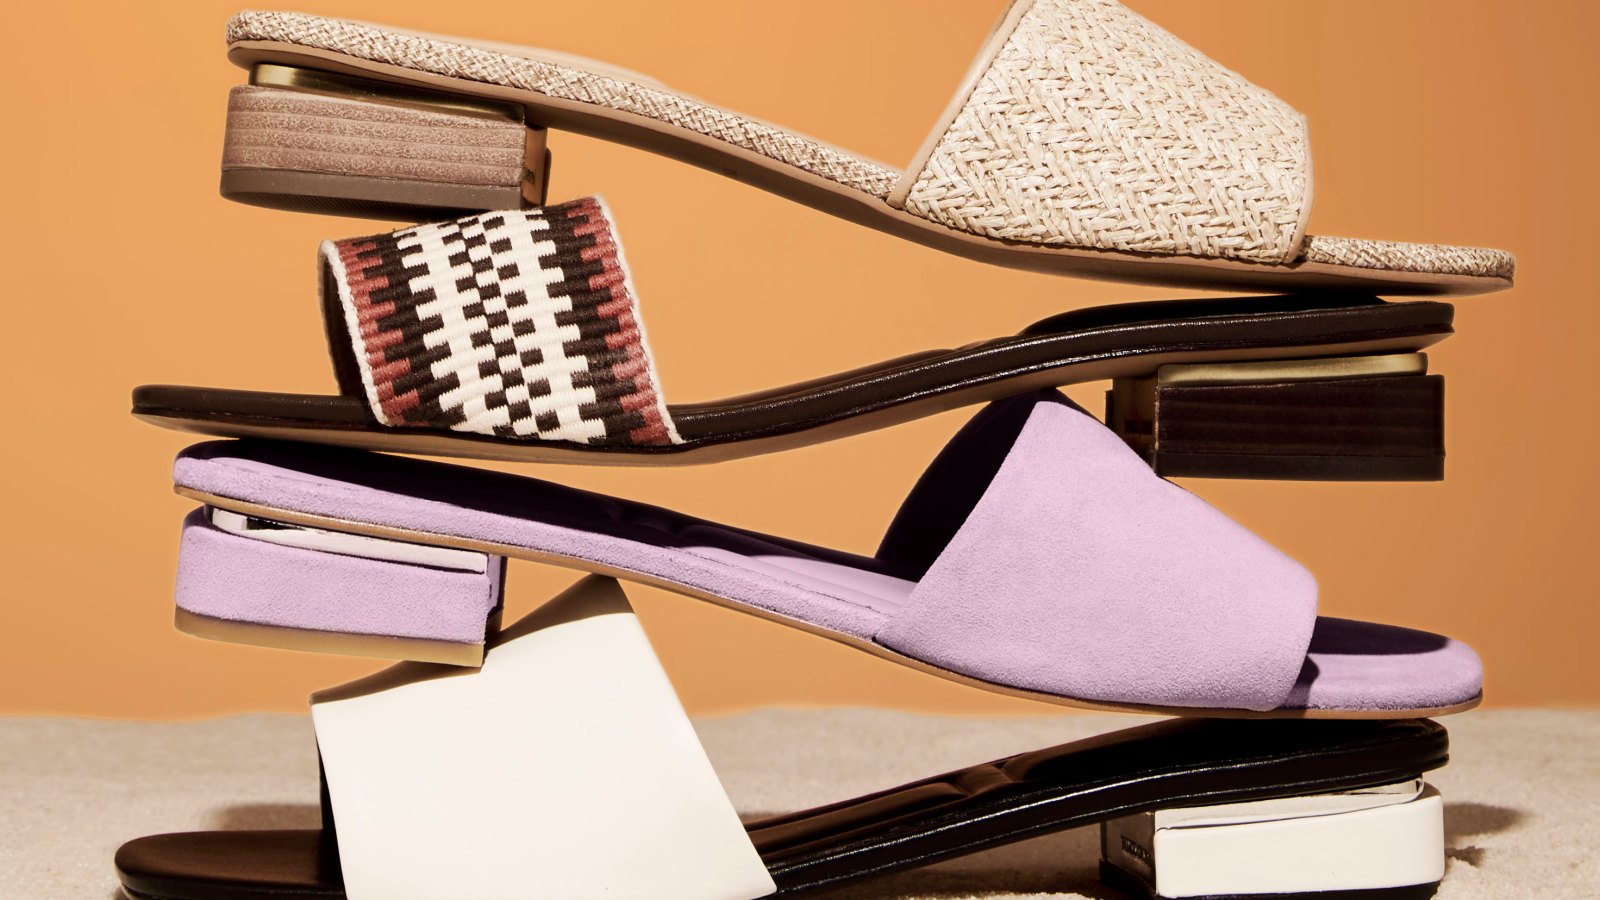 Vince Camuto spring shoes